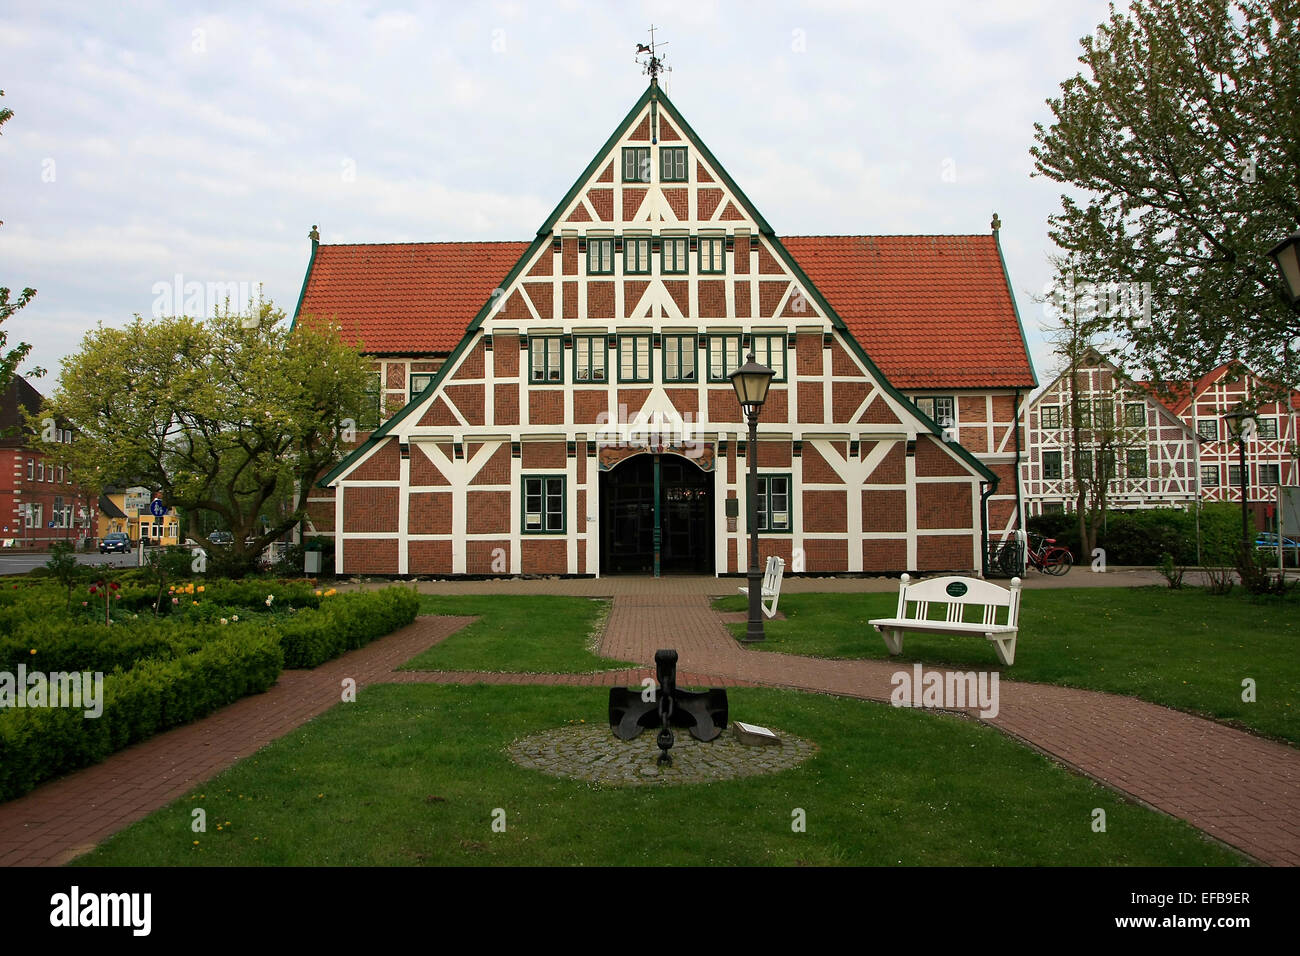 The Town hall of York (Jork). The Town Hall is the former Gräfenhof and a historic half-timbered house in the city of York. York is a town in Lower Saxony and the center of the Altes Land. Photo: Klaus Nowottnick Date: May 22, 2014 Stock Photo